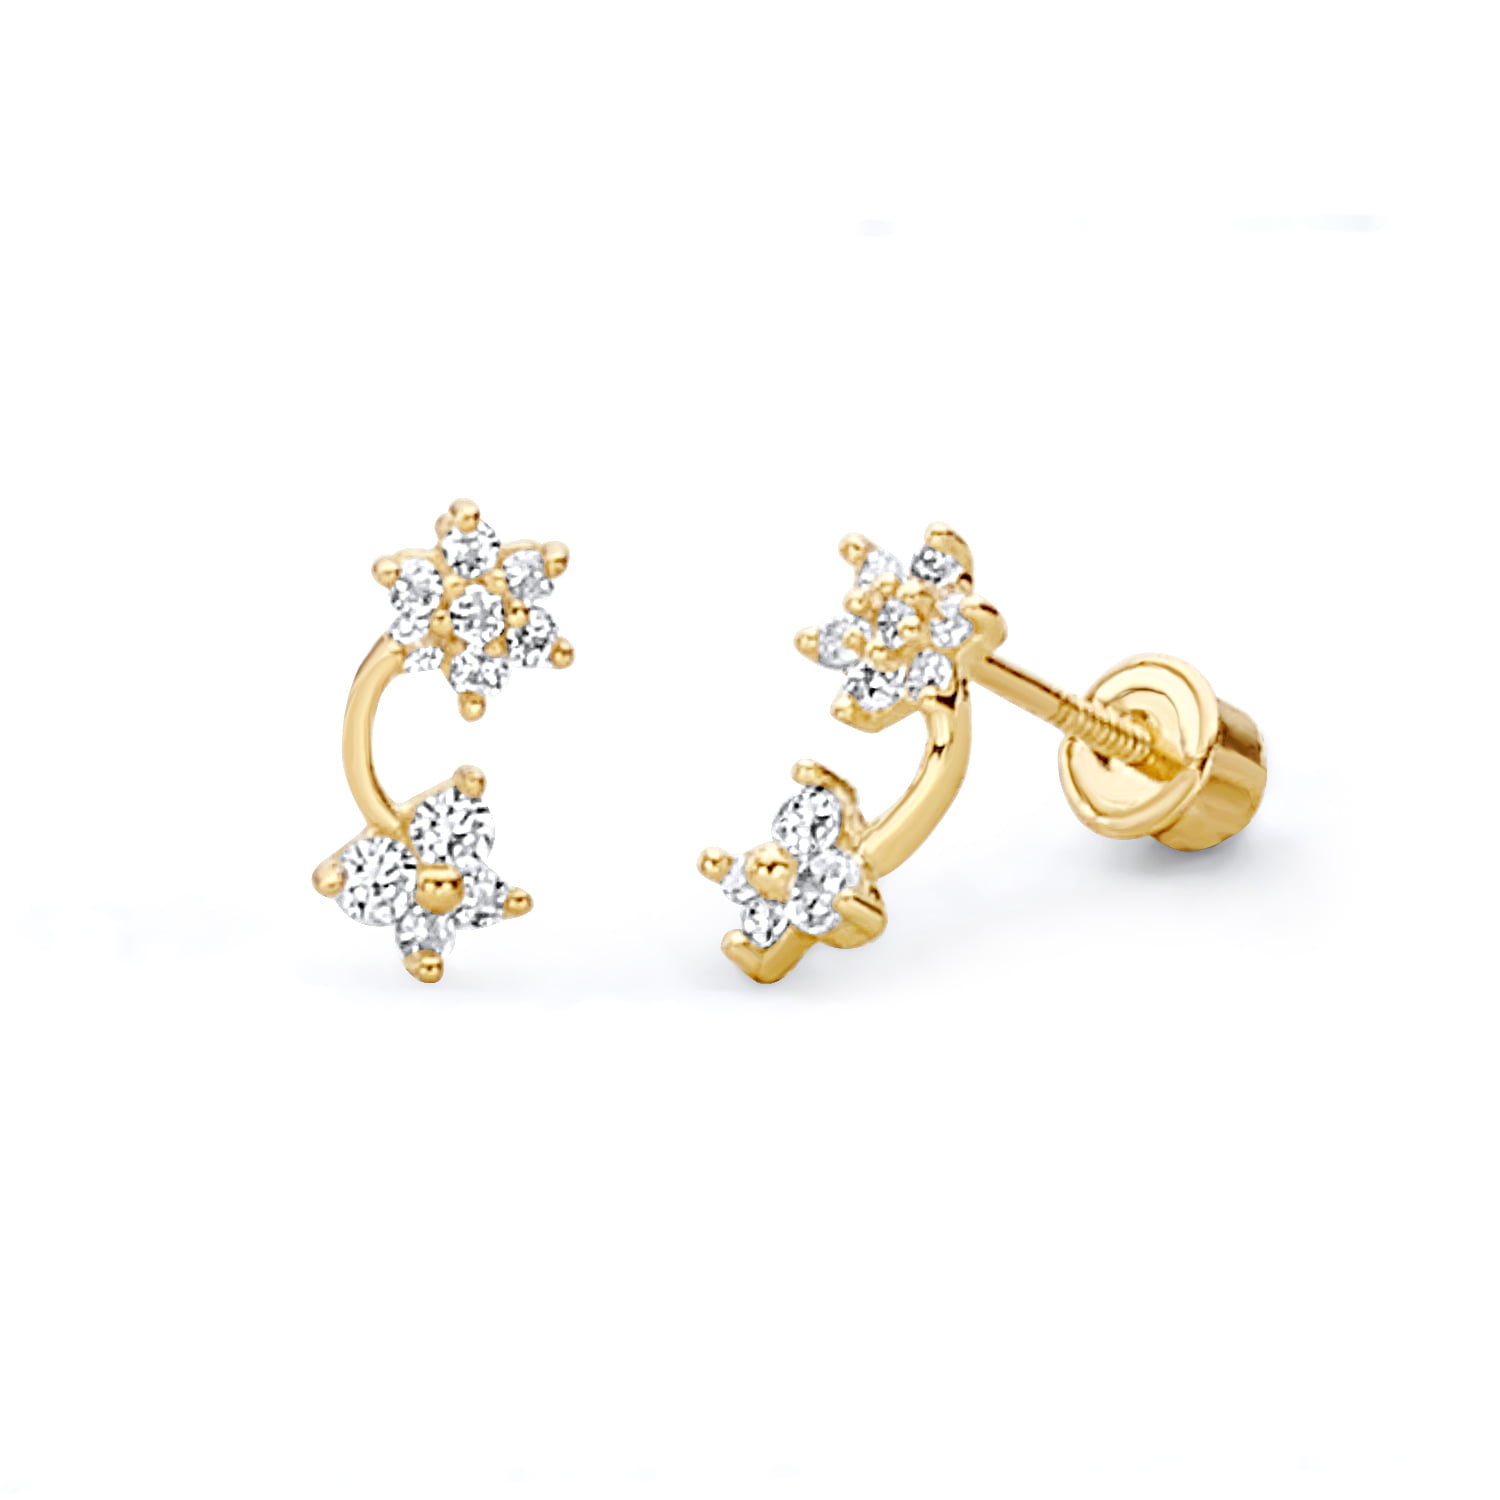 Wellingsale 14K Yellow Gold Polished Circular Stud Earrings With Screw Back